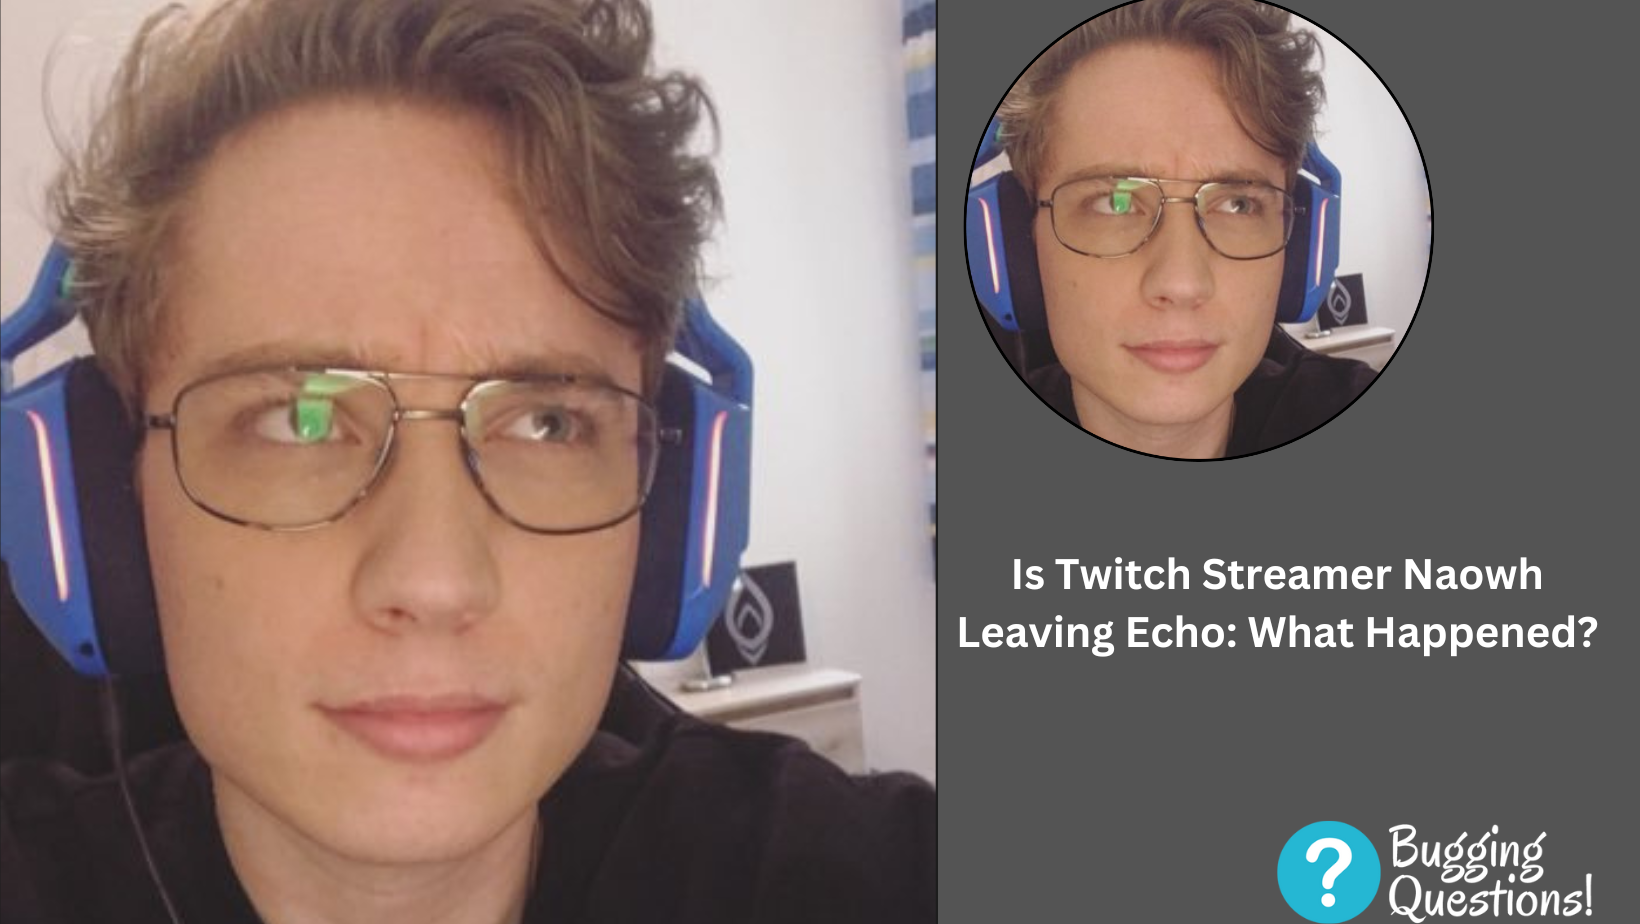 Is Twitch Streamer Naowh Leaving Echo: What Happened?